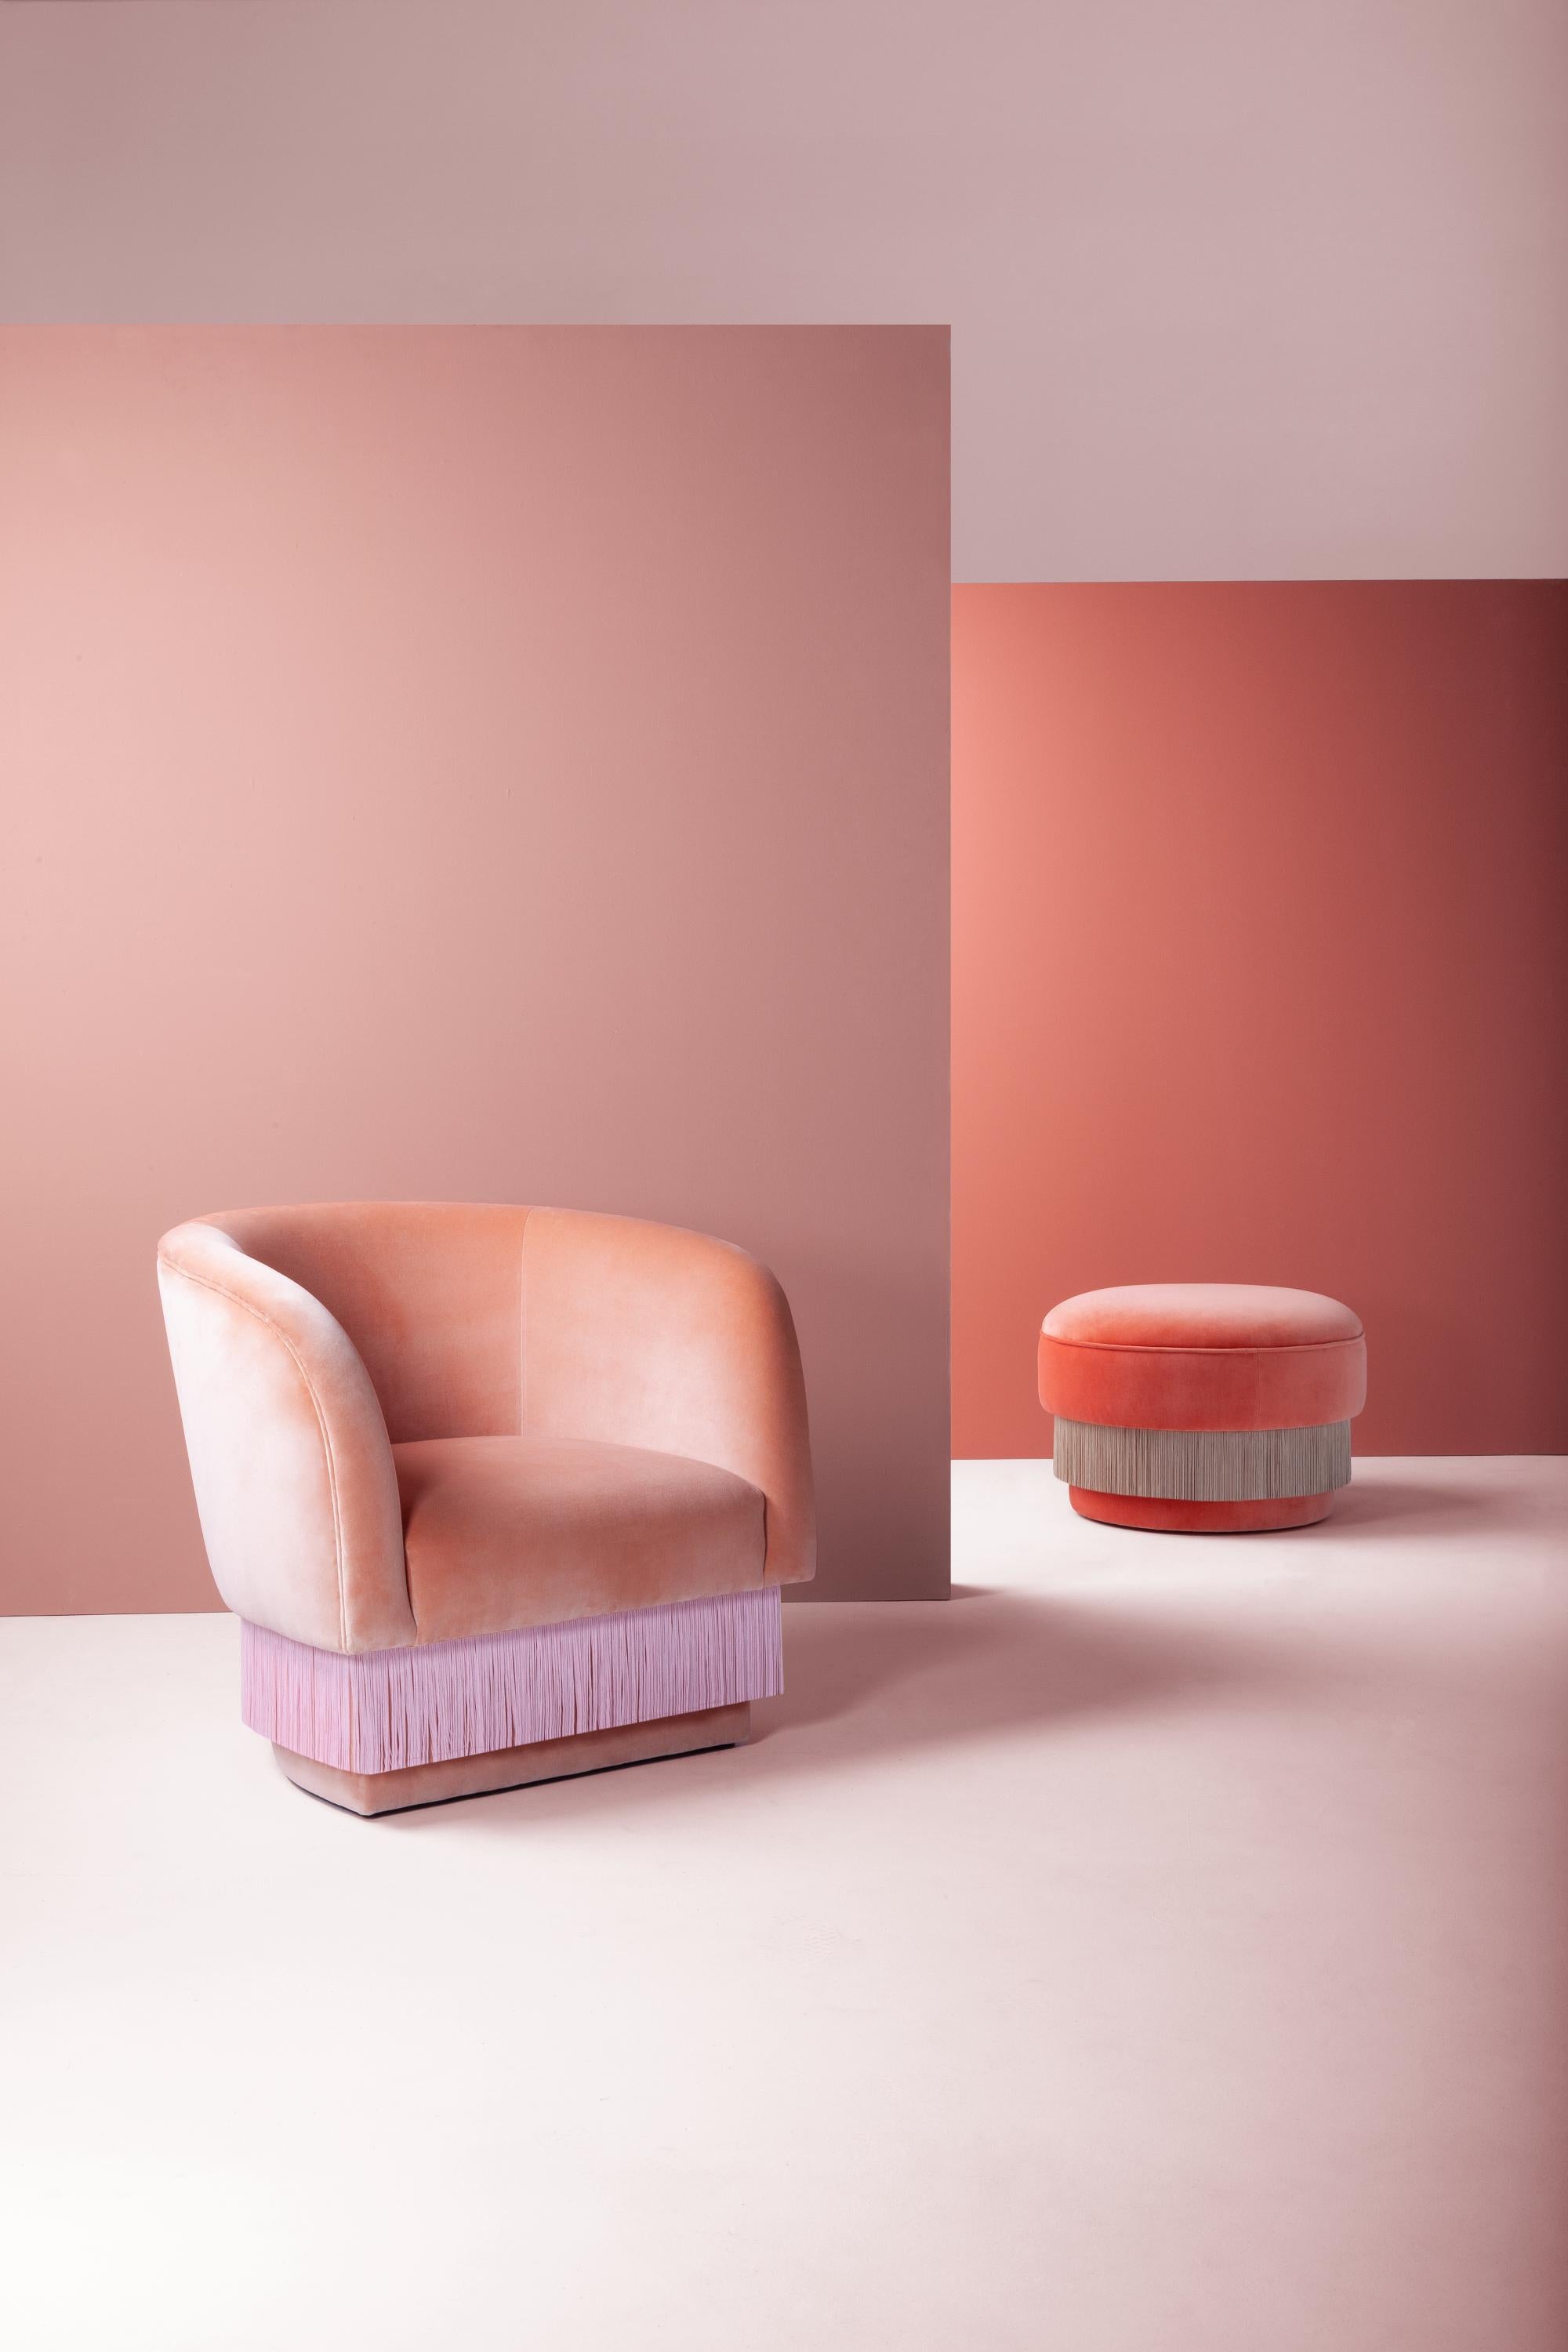 Folie armchair by Dooq
Measures: W 82 cm, 32”
D 70 cm, 28”
H 75 cm, 30”
Seat height 42 cm, 17”

Materials: Upholstery and piping fabric or leather, fringes.

Dooq is a design company dedicated to celebrate the luxury of living. Creating